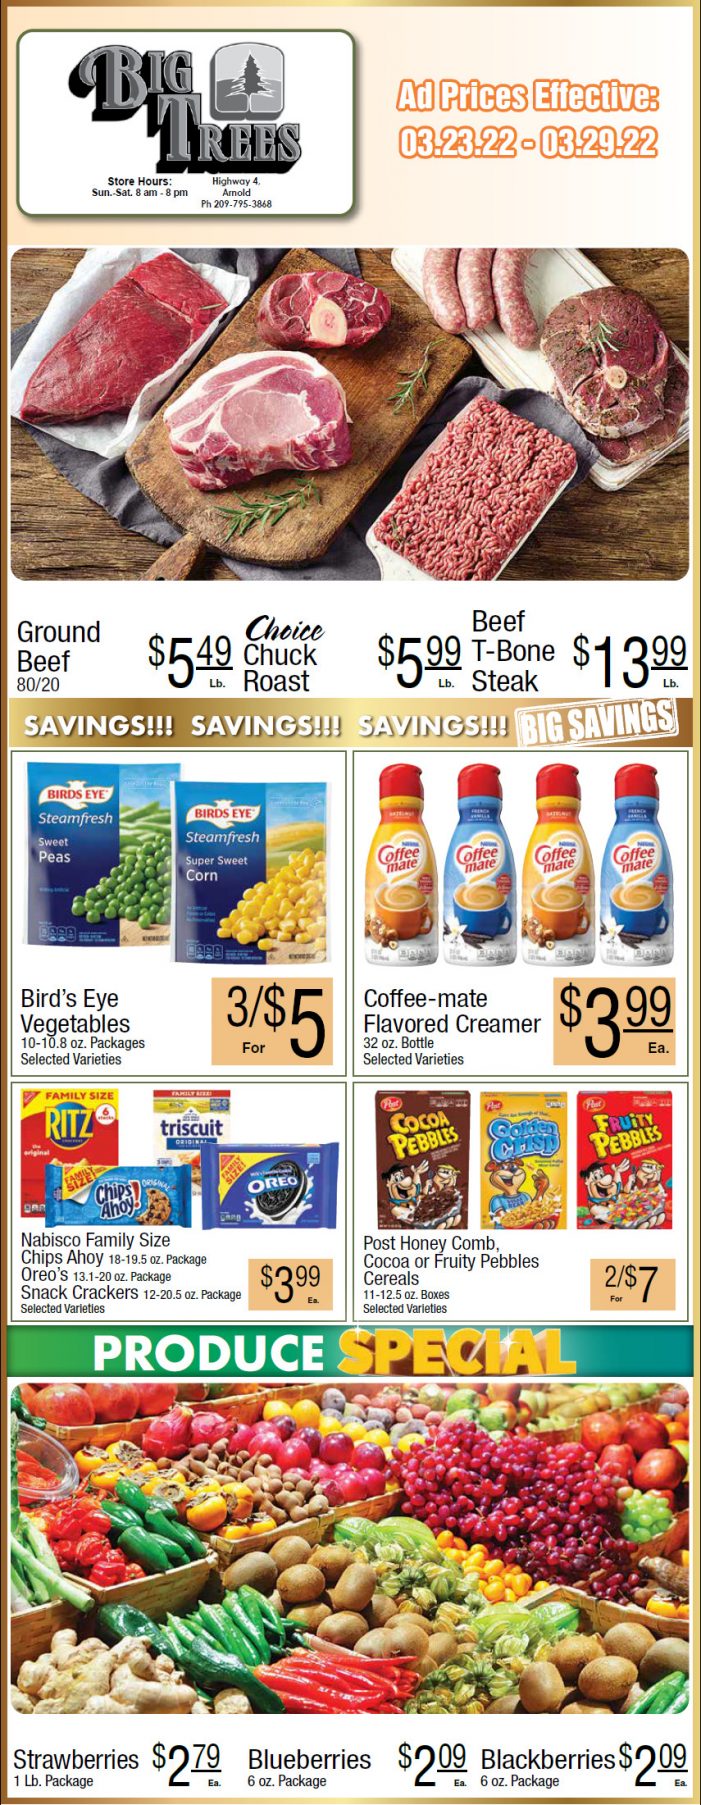 Big Trees Market Weekly Ad & Grocery Specials March 23rd Through March 29th! Shop Local & Save!